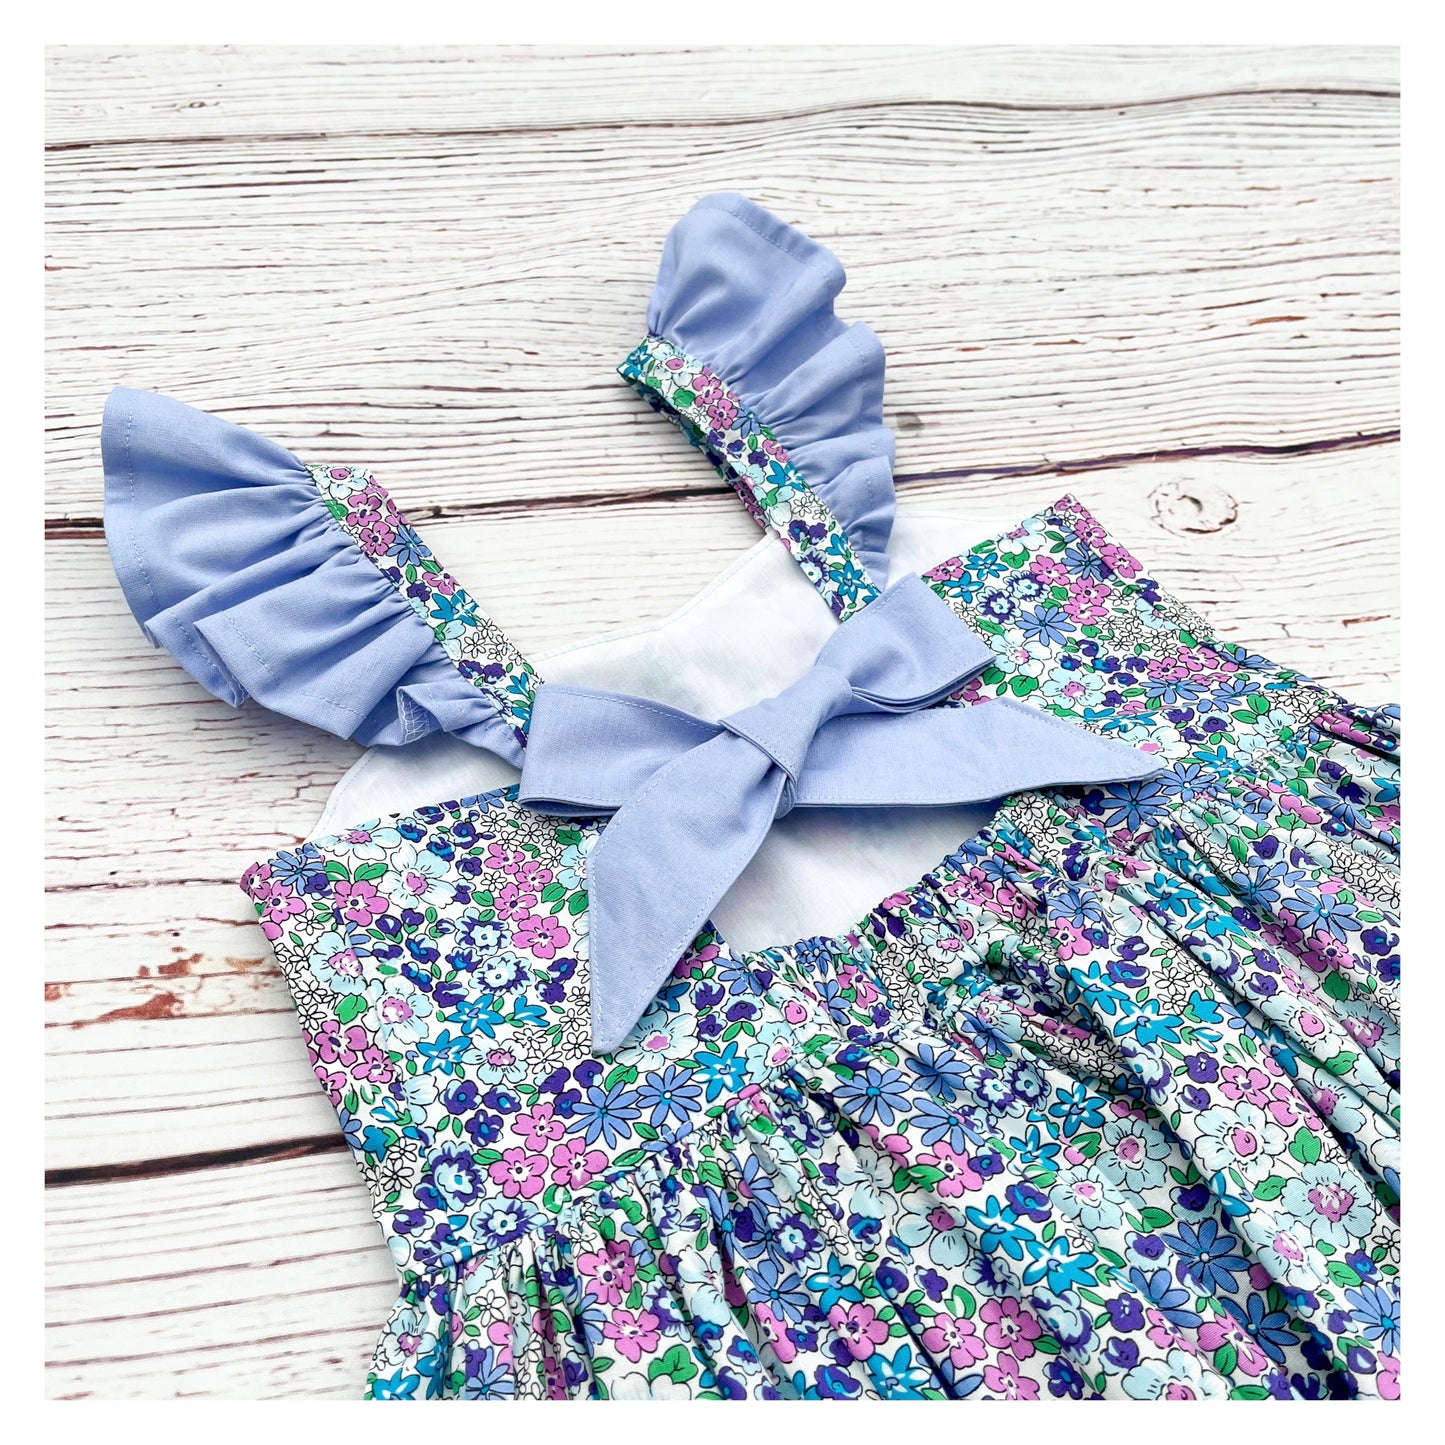 SURPRISE Summer Bow Back Dress MADE TO ORDER